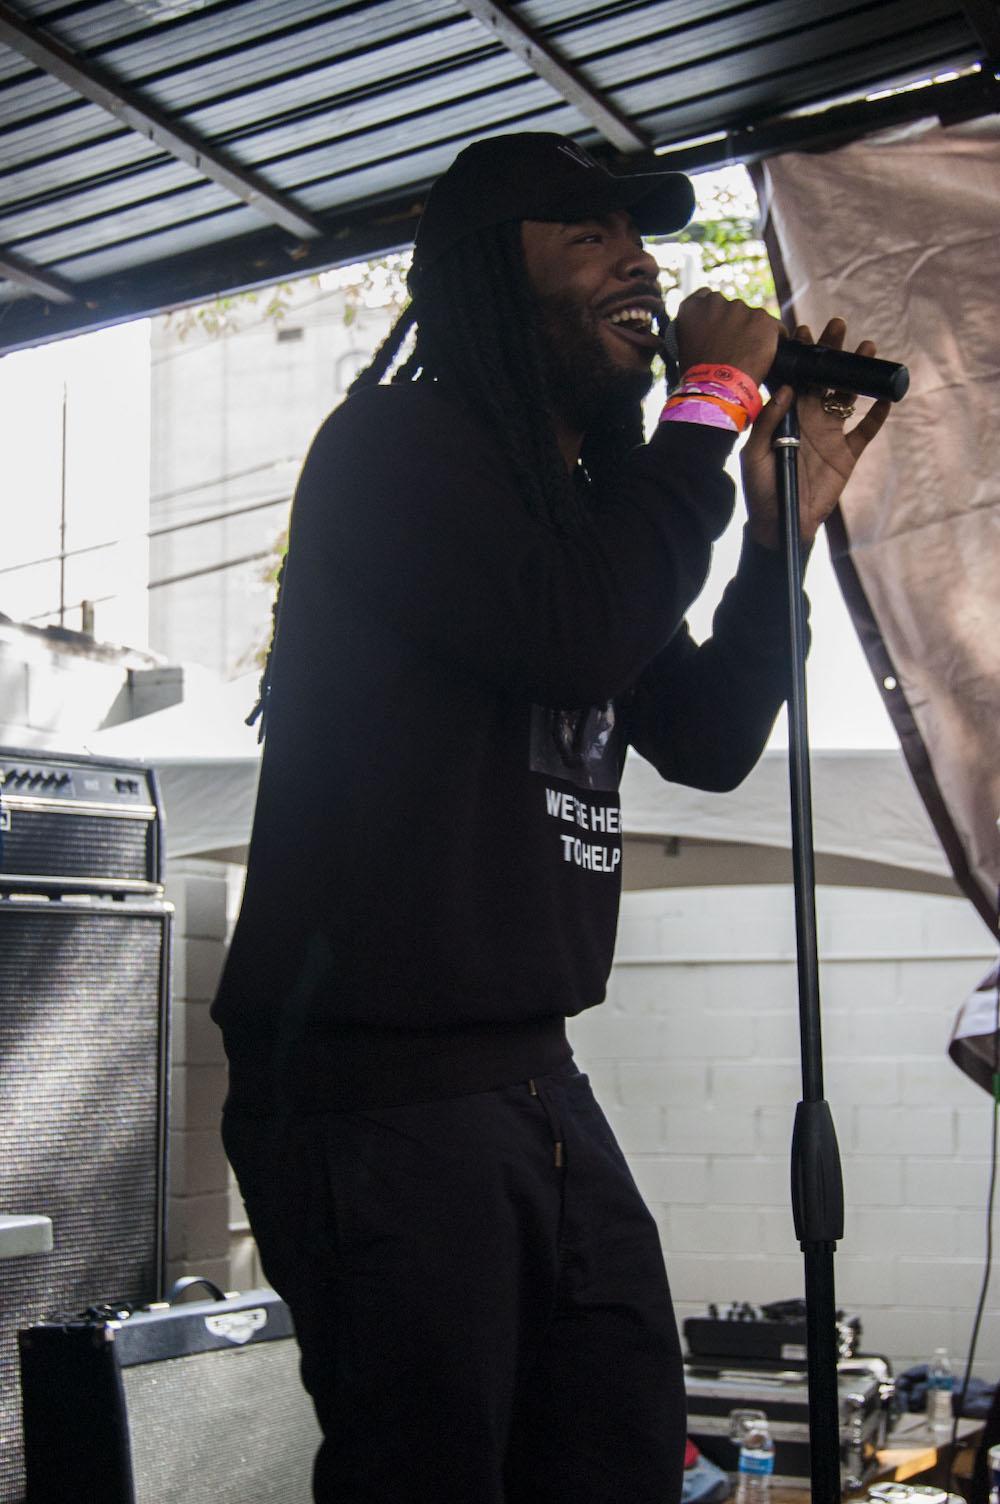 SXSW+All+the+Rest%3A+Earl+Sweatshirt%2C+Neon+Indian%2C+D.R.A.M.+and+more